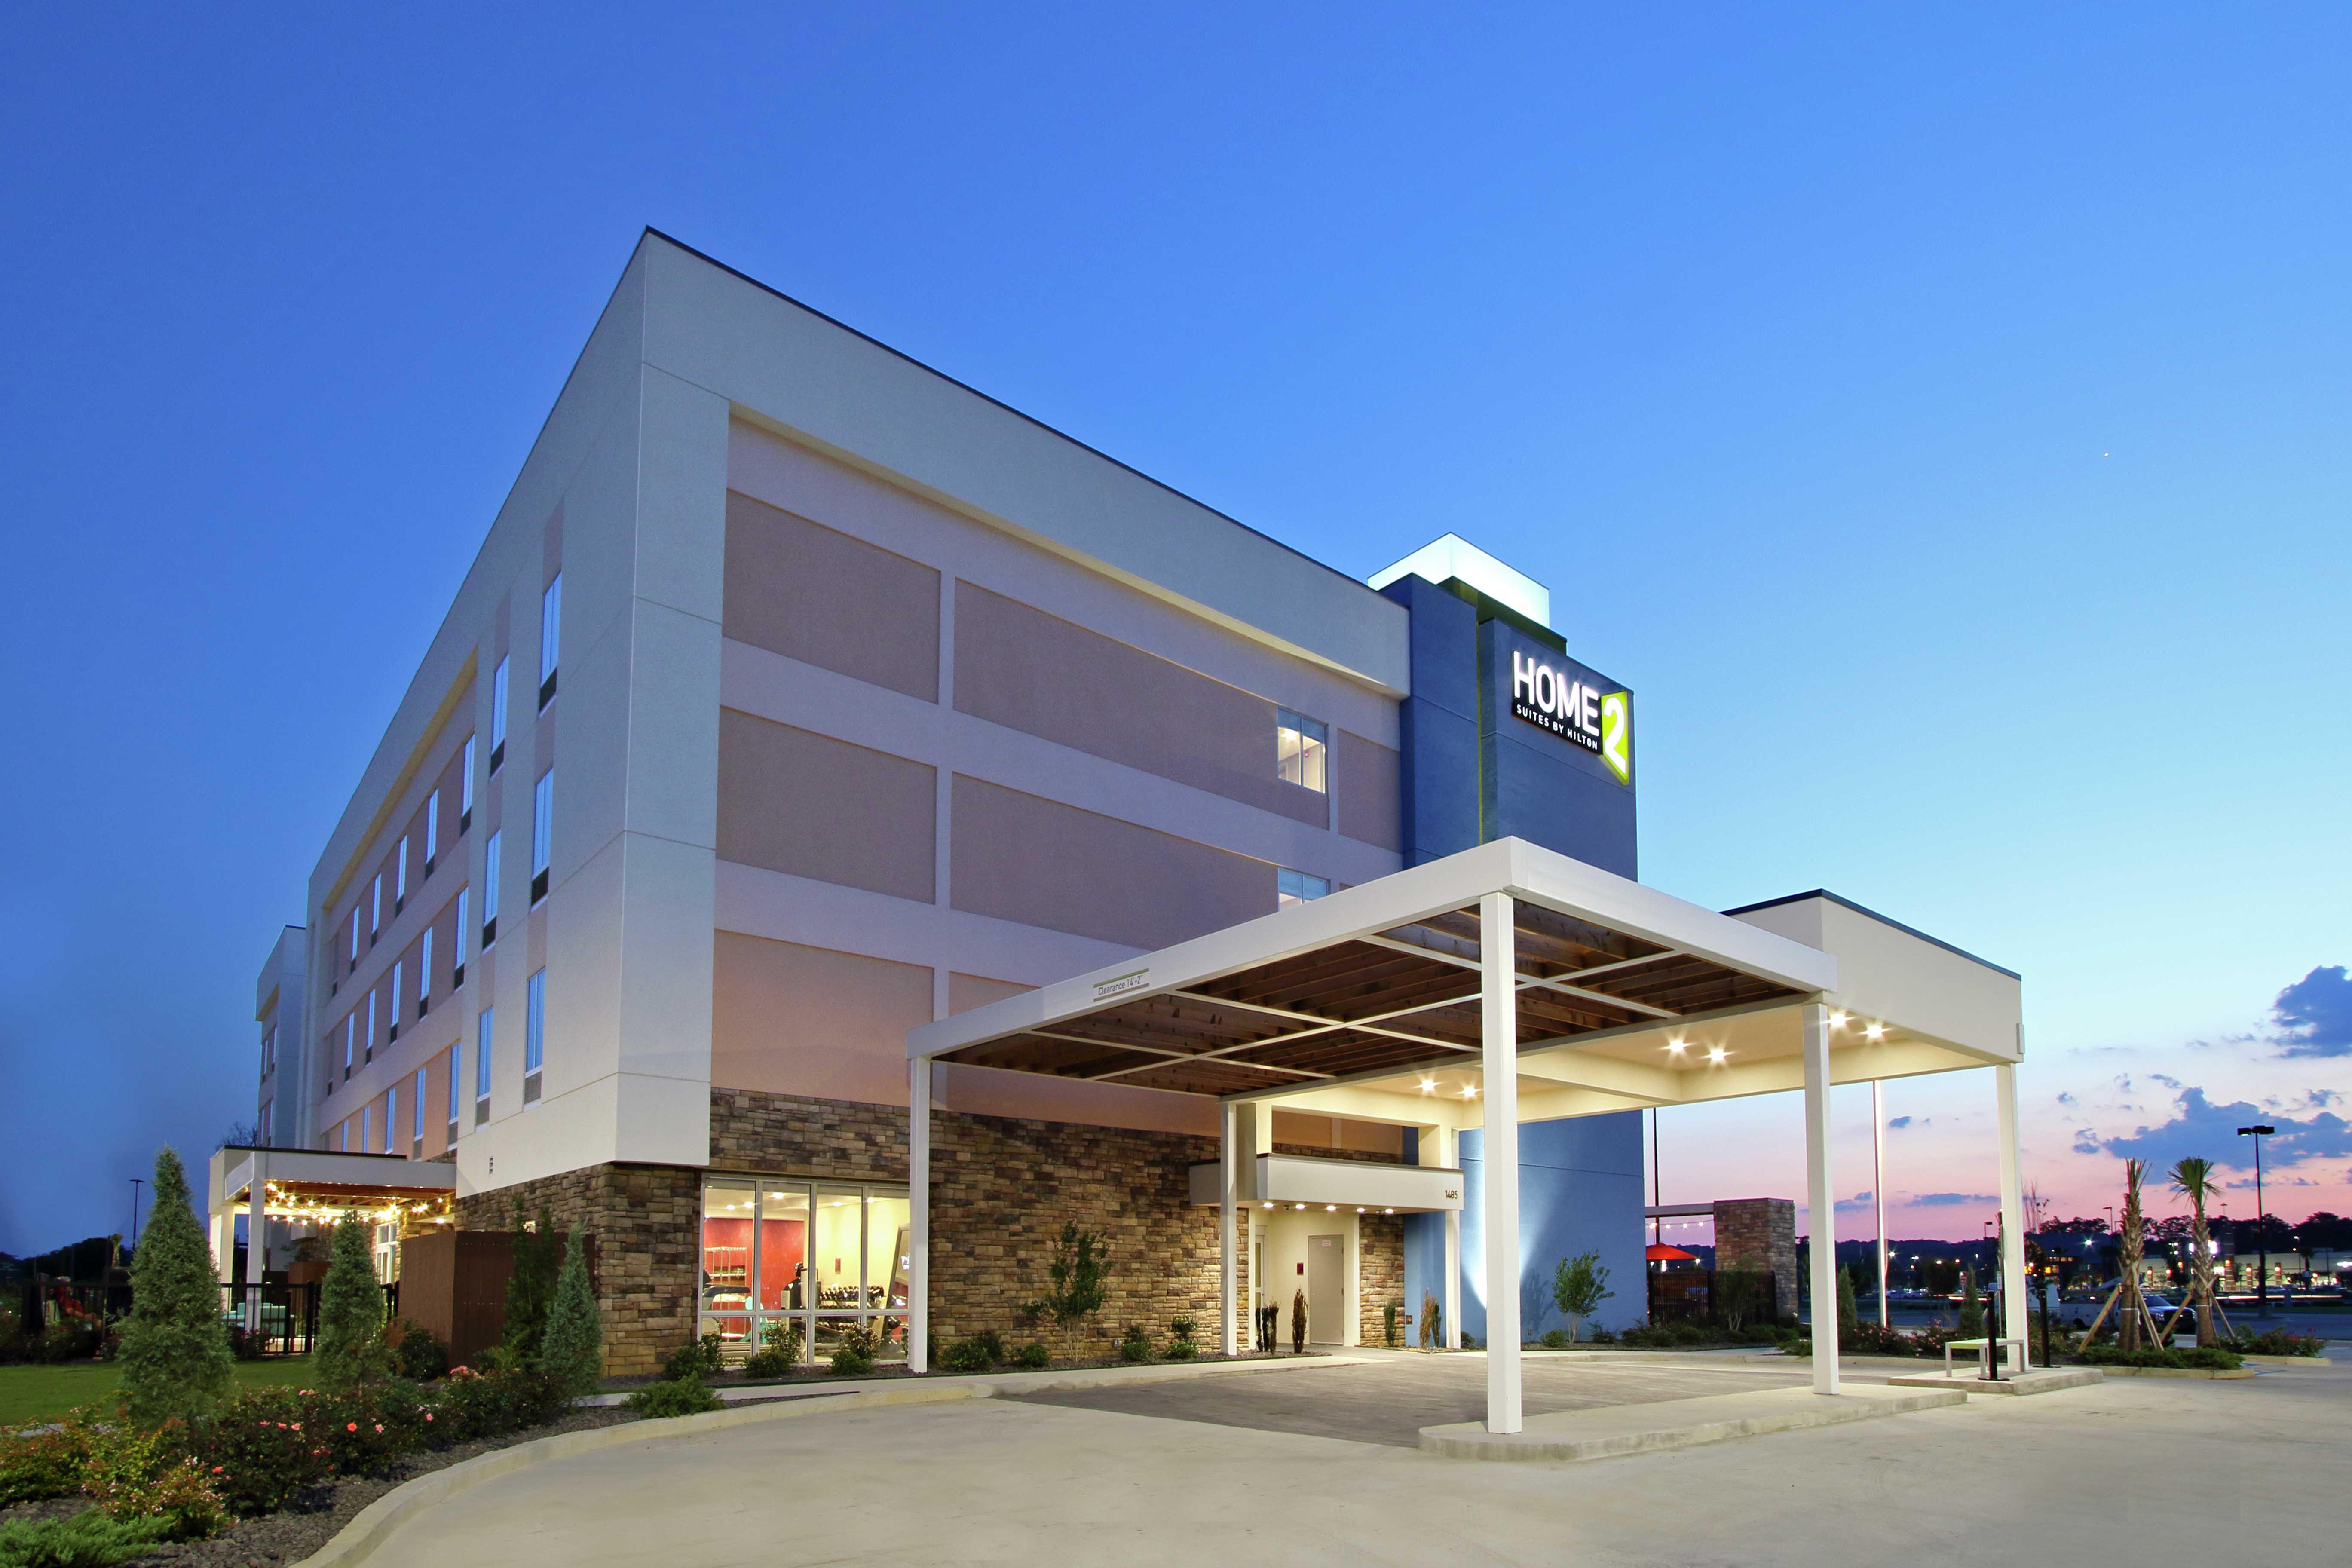 Illuminated Hotel Exterior With Signage, Porte Cochère, and Landscaping at Dusk